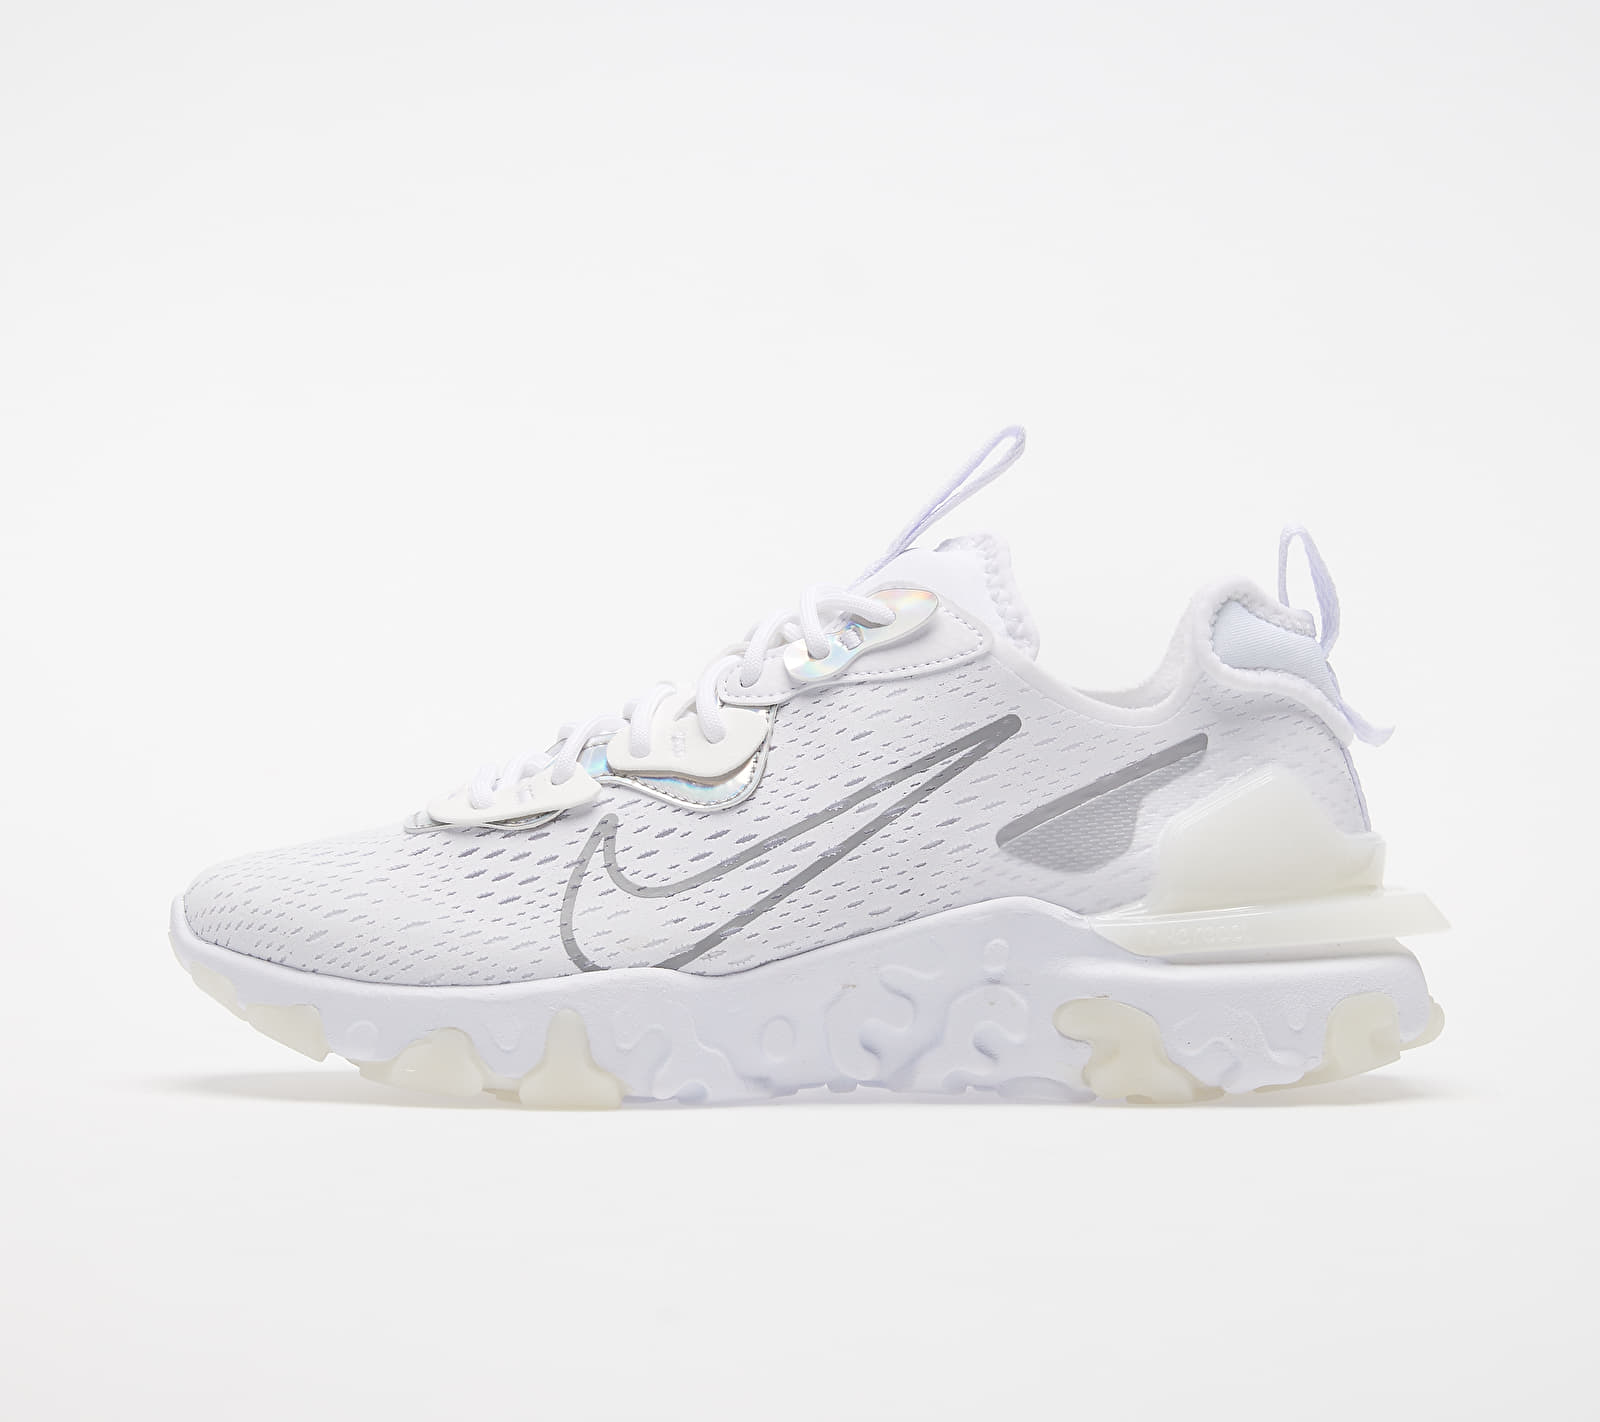 Nike W NSW React Vision Essential White/ Particle Grey-White CW0730-100